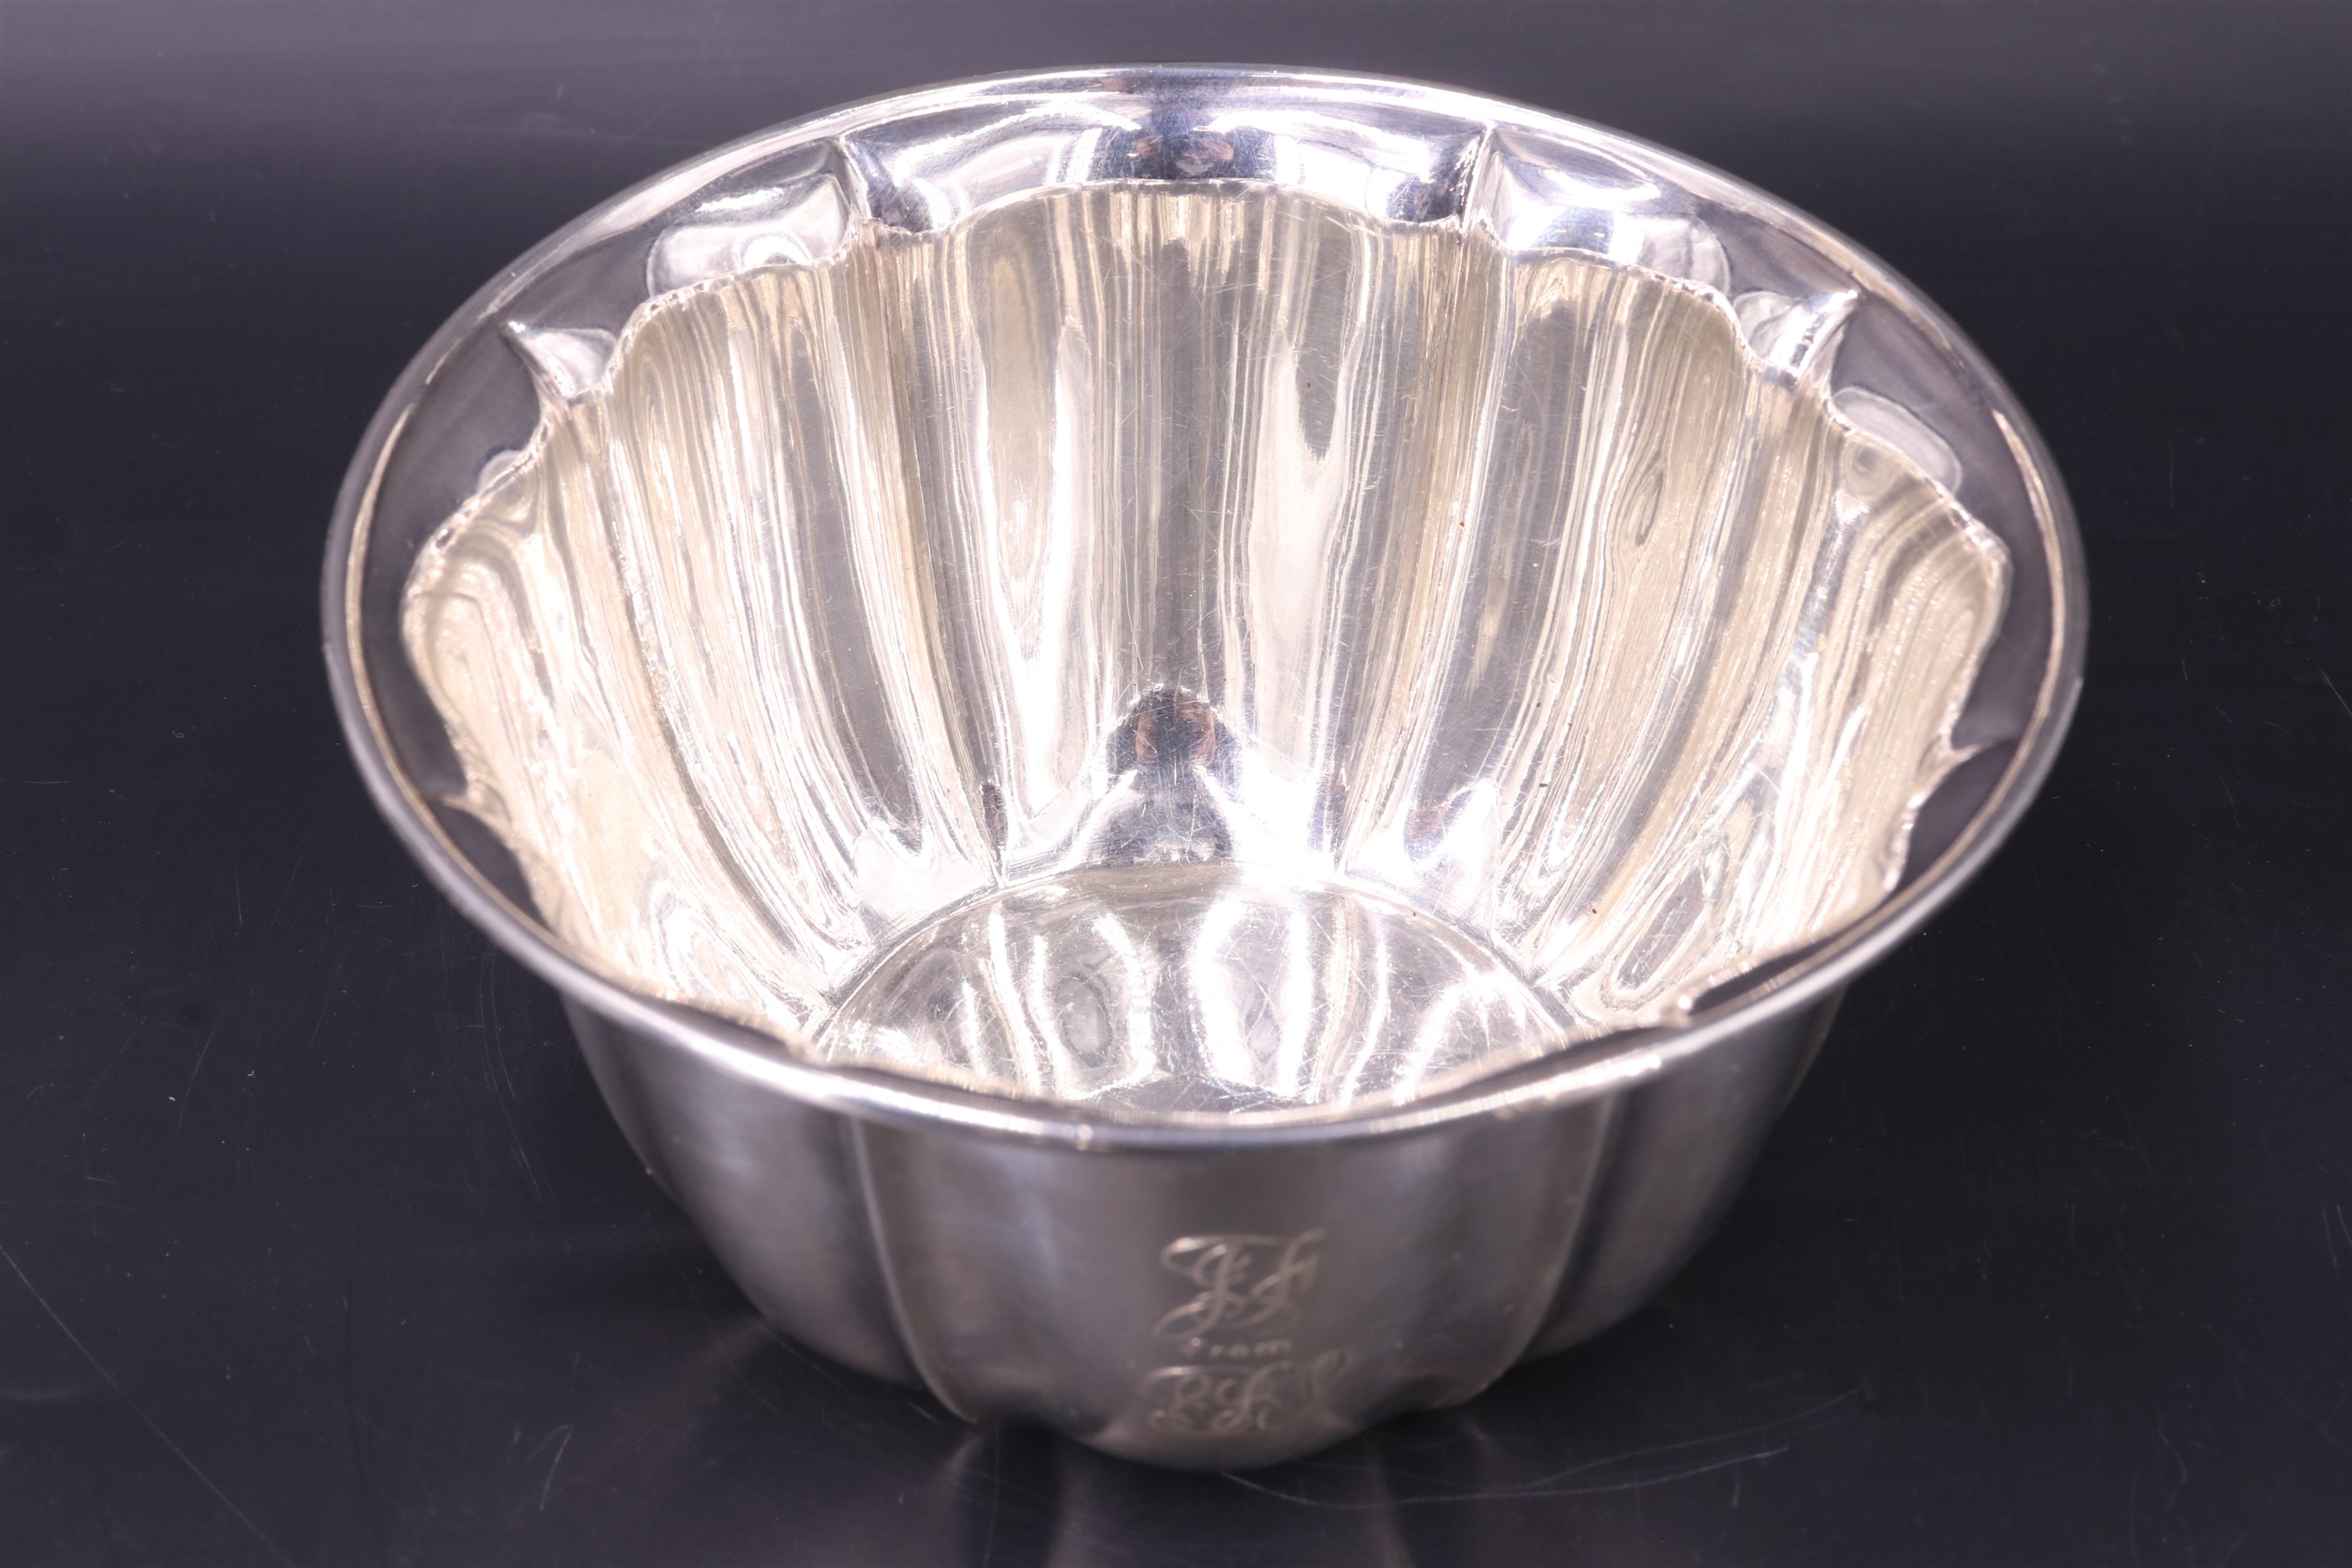 A cased Edwardian silver christening bowl and spoon, Atkin Brothers, Sheffield, 1904, 178 g gross, - Image 3 of 8